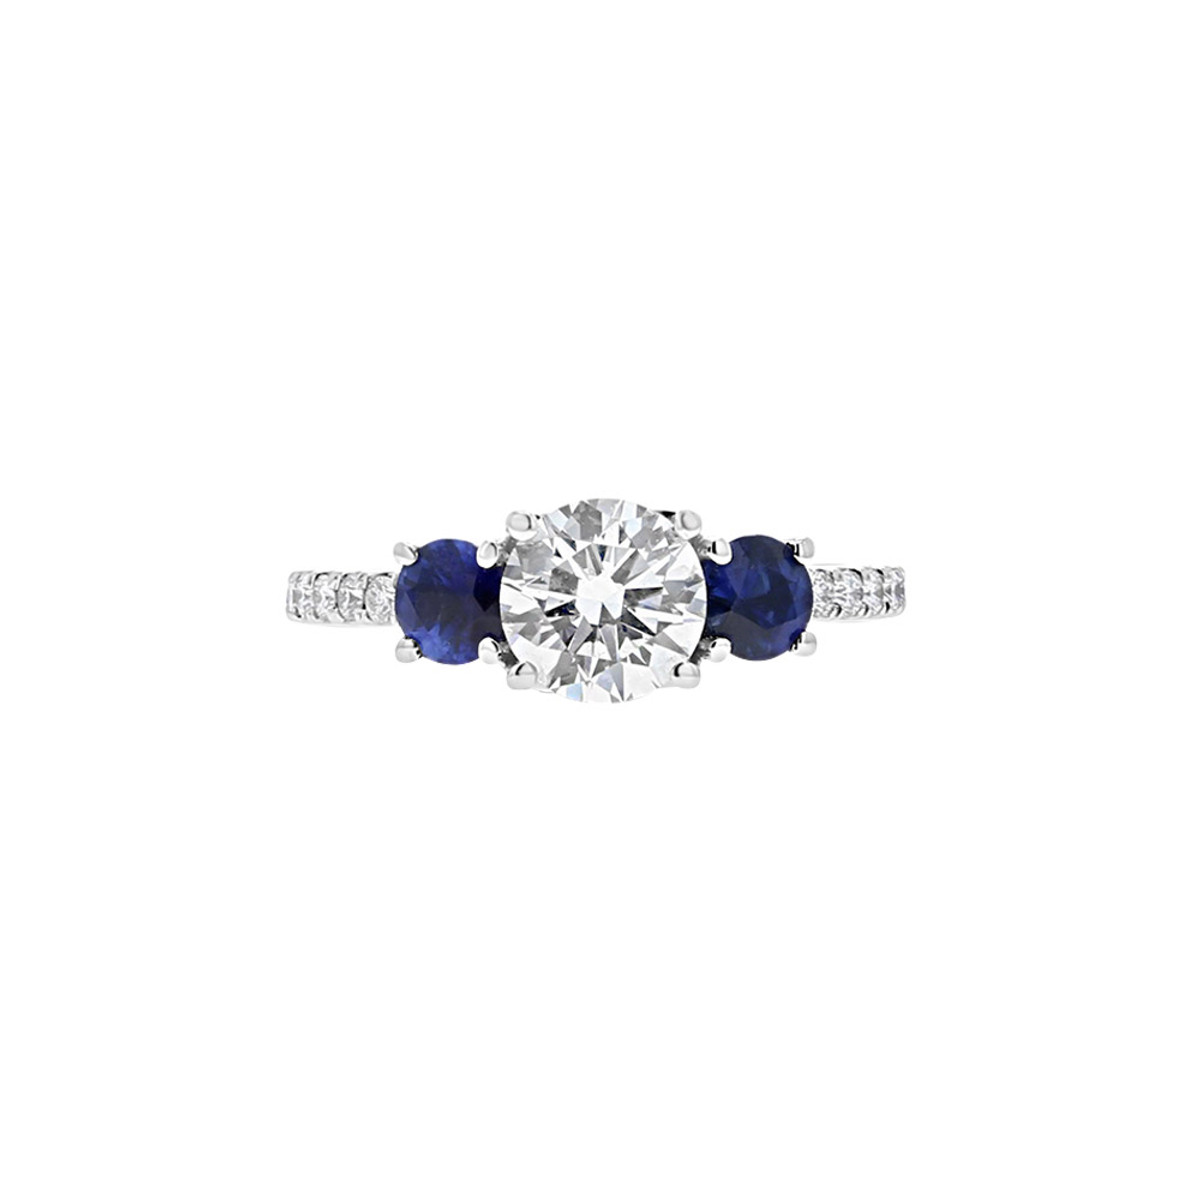 Engage By Hyde Park 18K White Gold, Sapphire & Diamond Three Stone Engagement Ring-DSCRD0500 Product Image